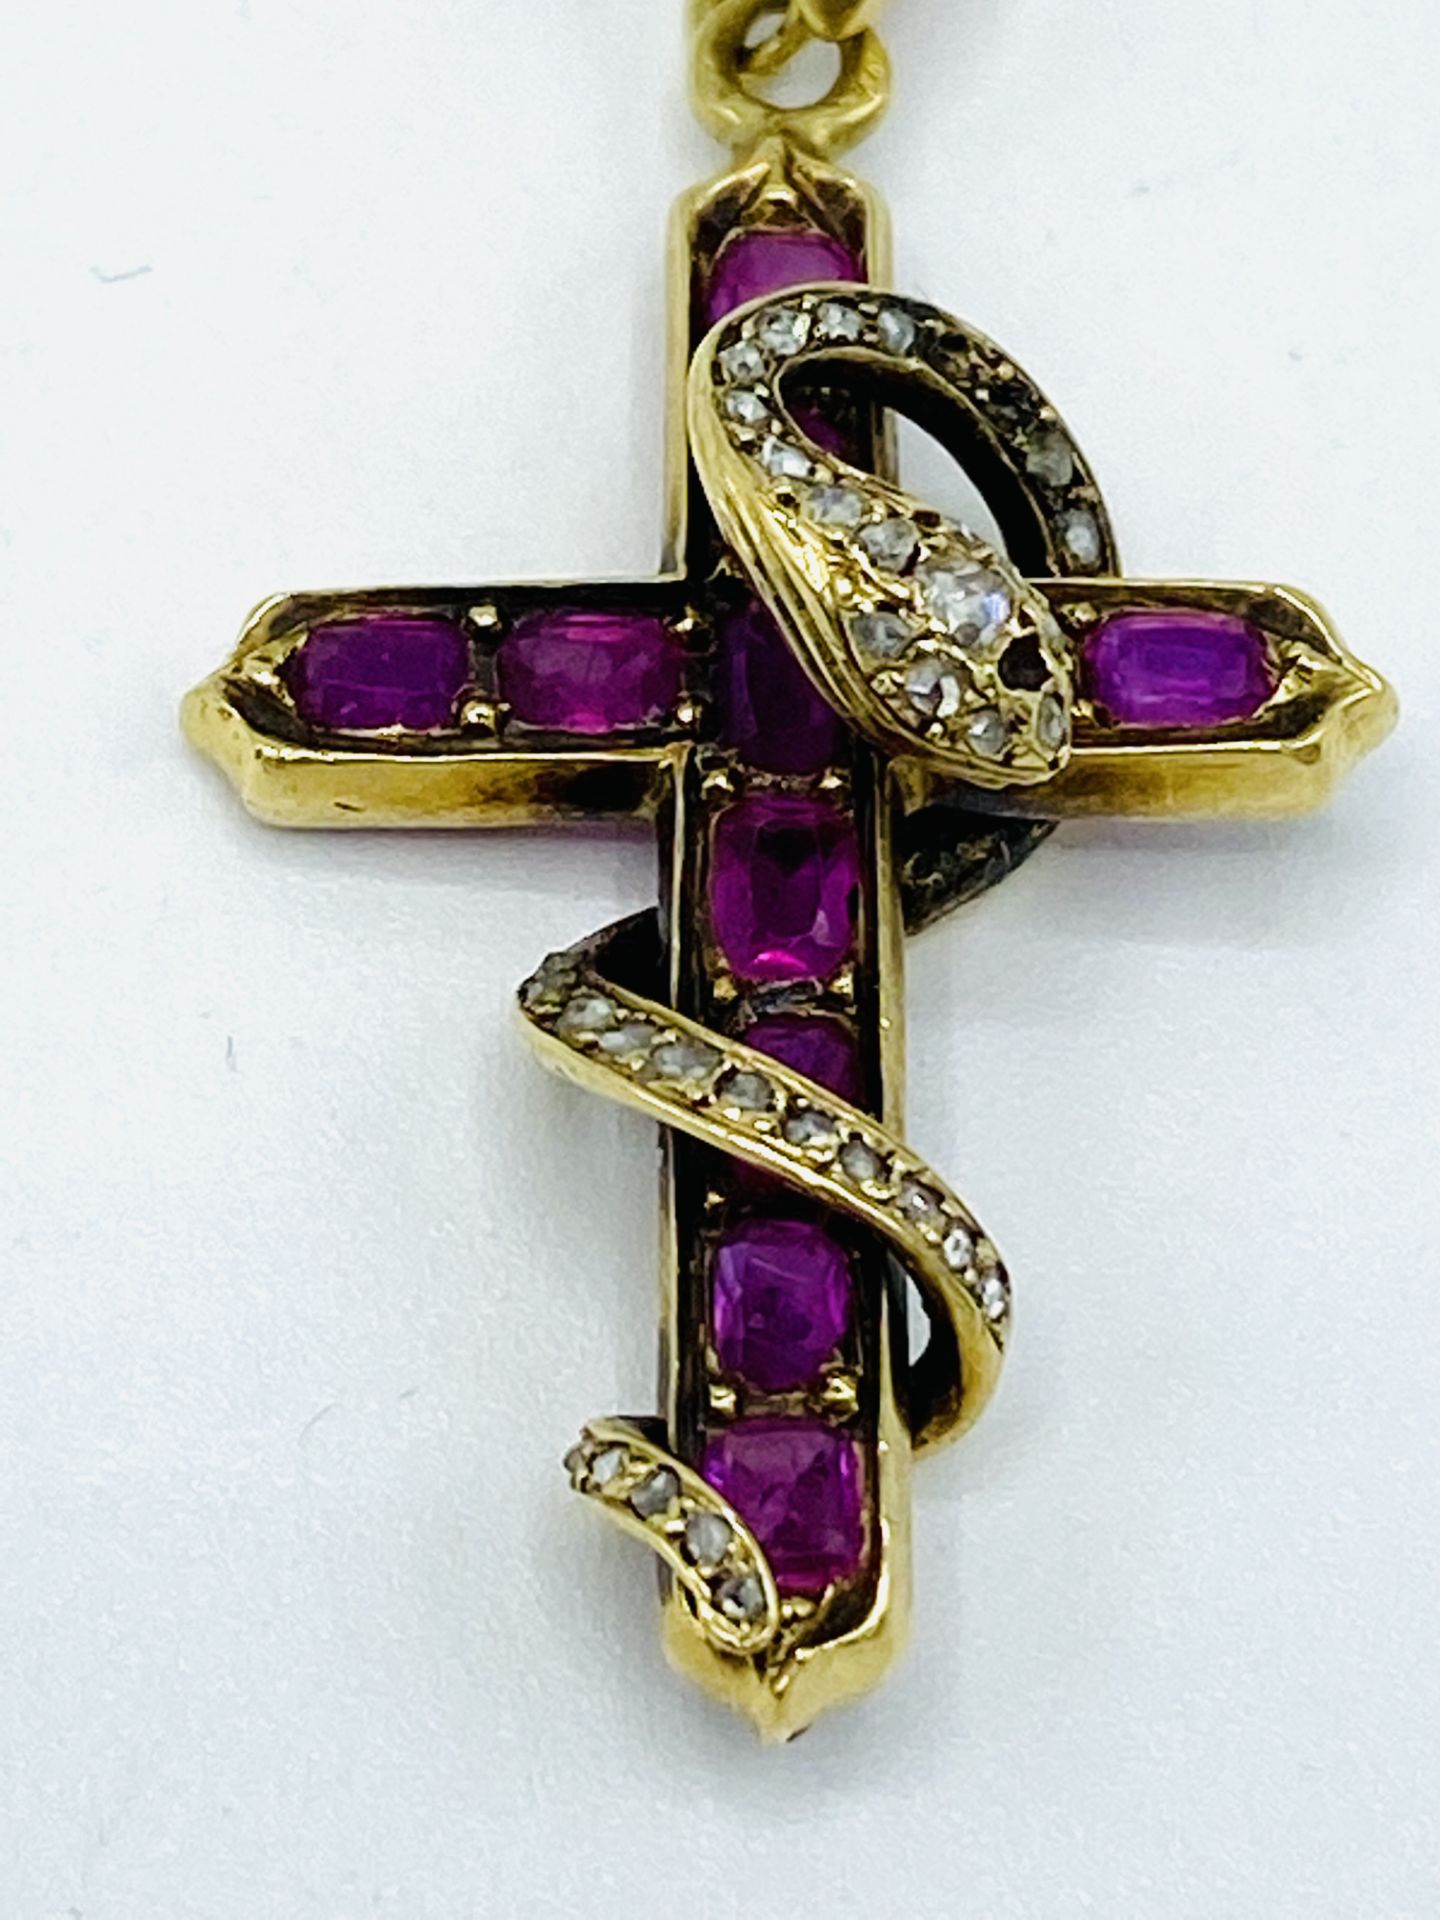 14 gold, pink sapphire and diamond pendant and chain - Image 2 of 3